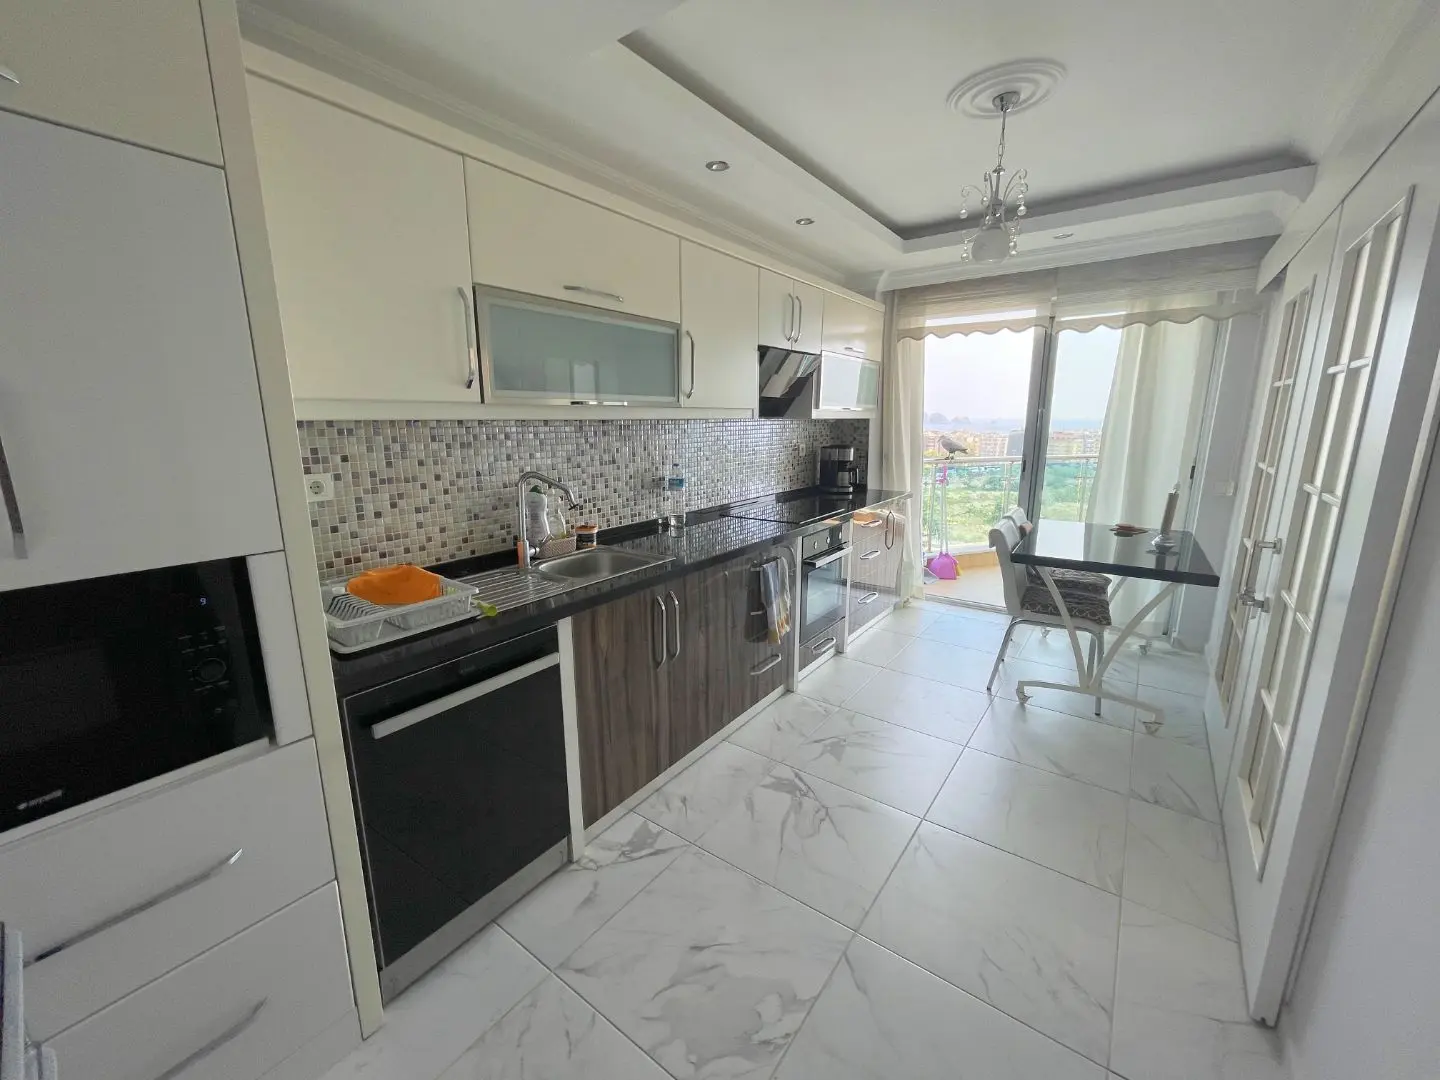 3+1 FLAT WITH SEA AND CASTLE VIEW IN ALANYA DİNEK